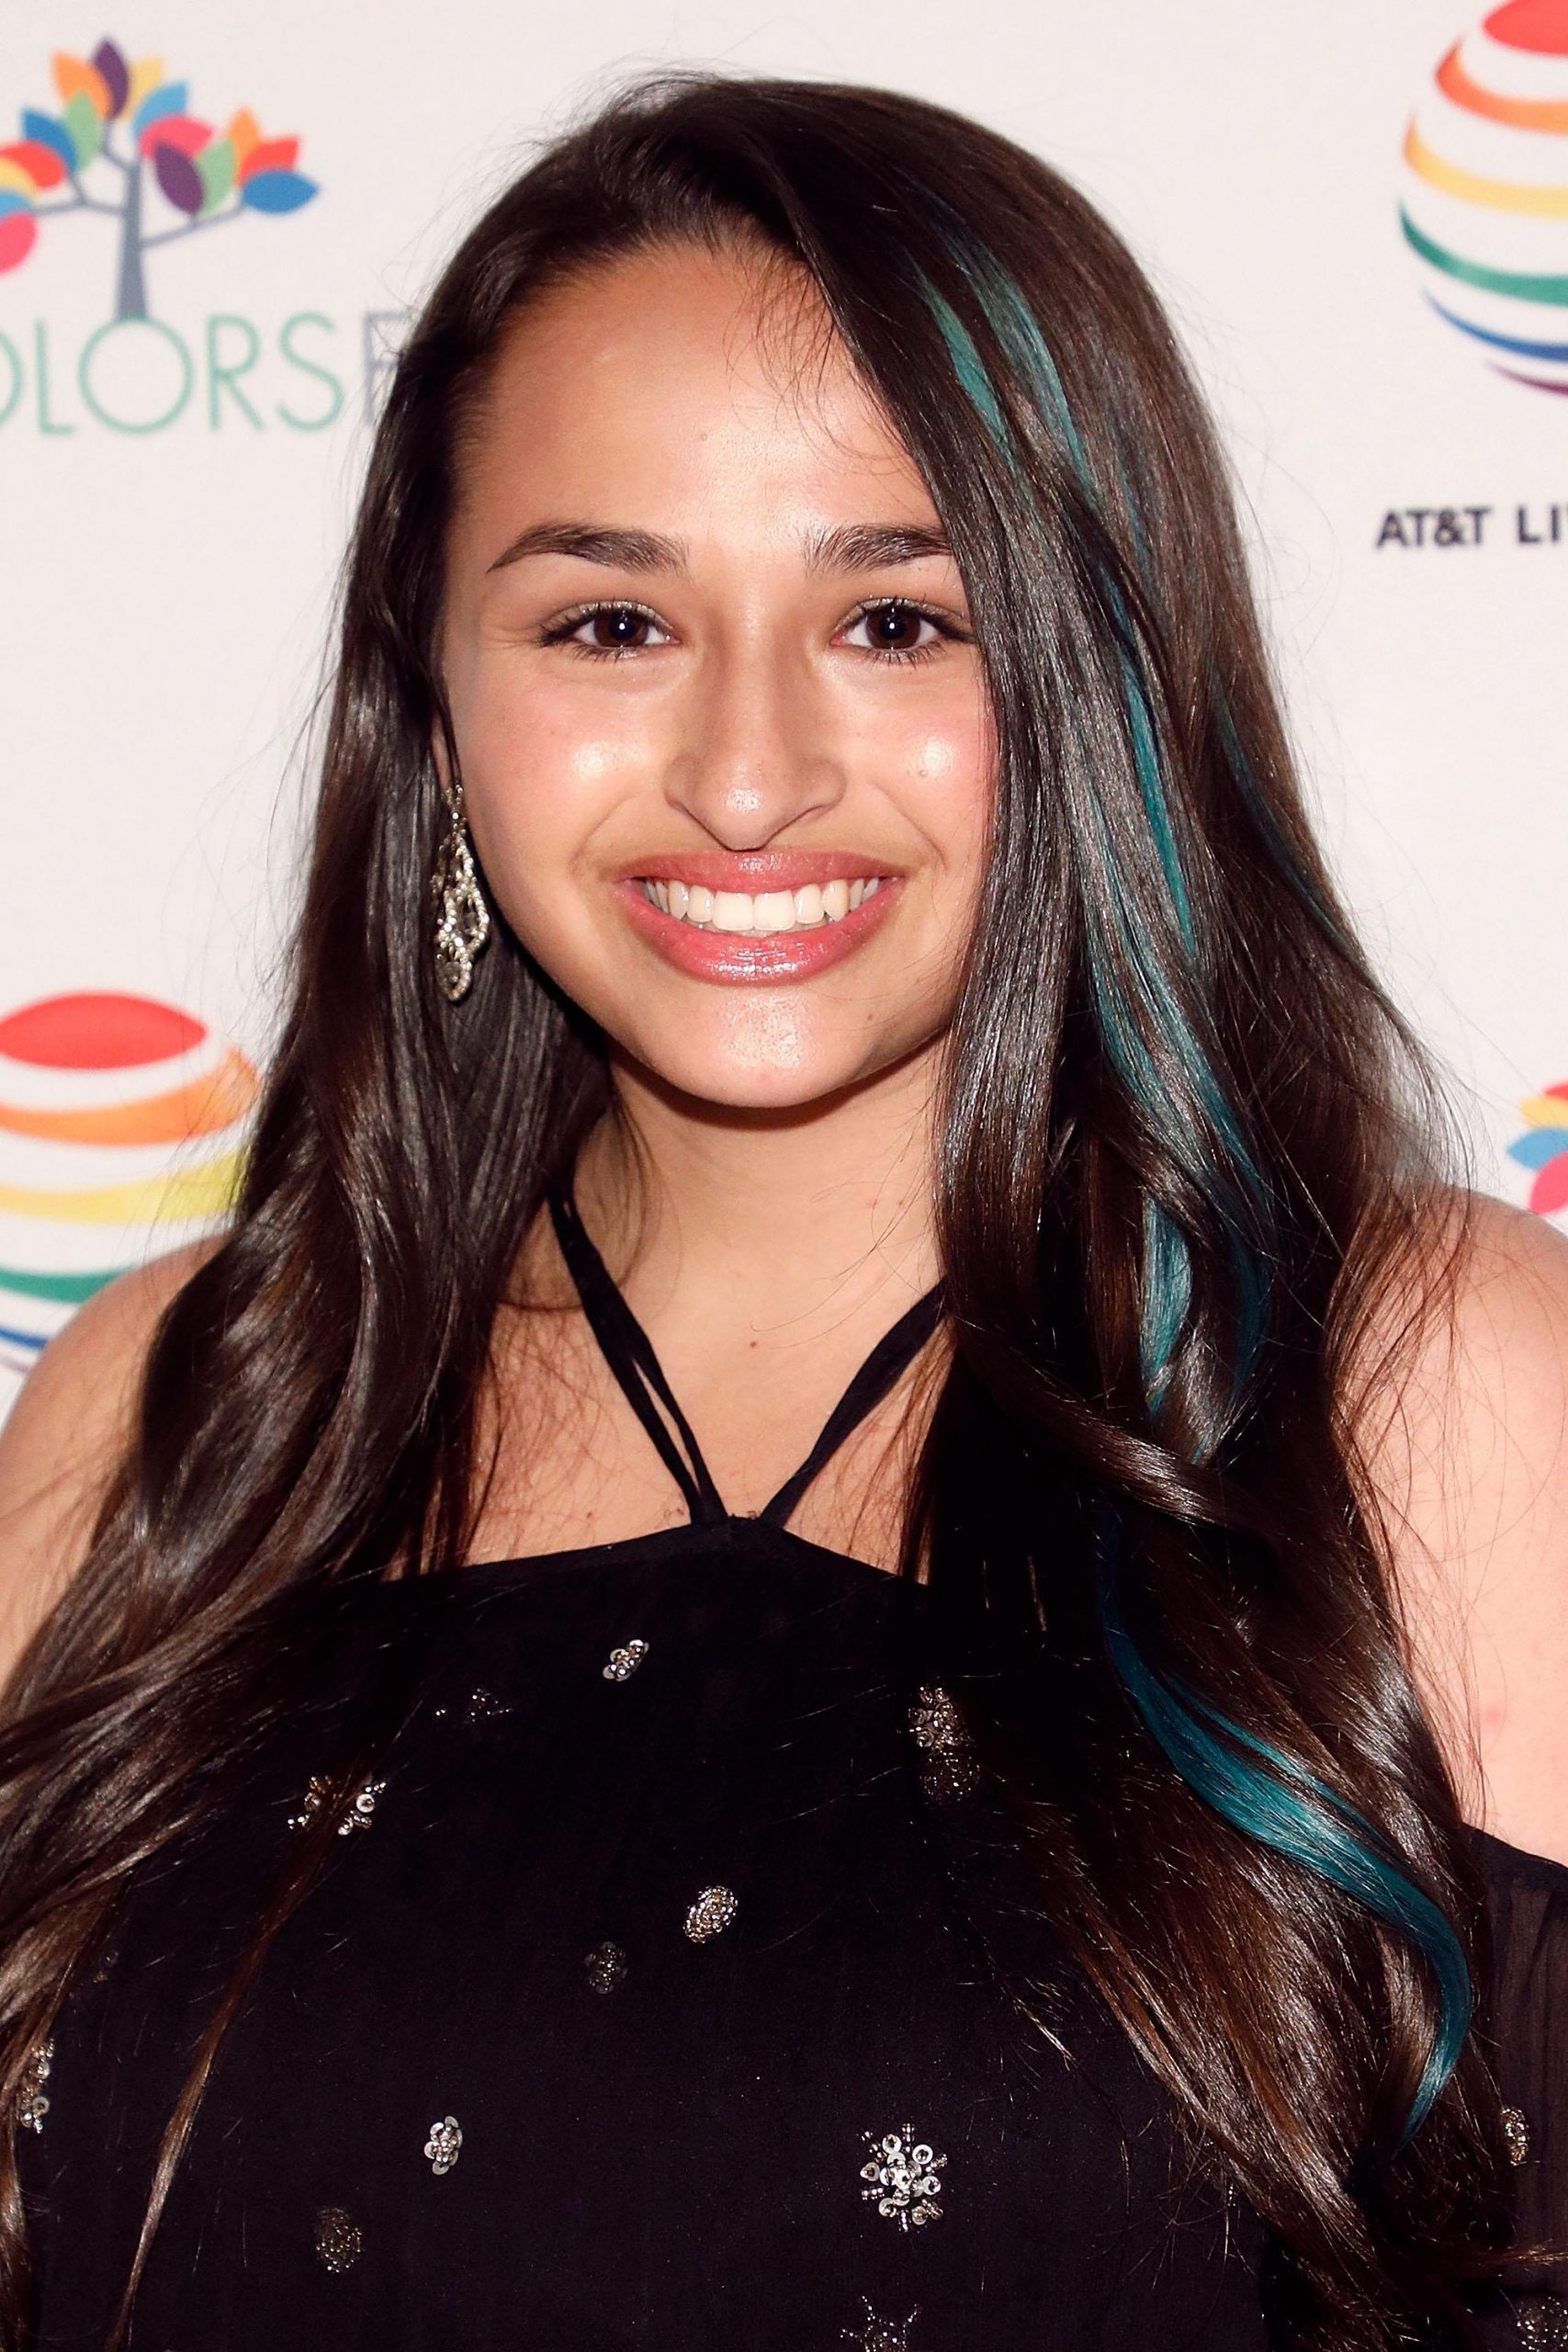 70+ Hot Pictures Of Jazz Jennings Which Will Make Your Mouth Water 47